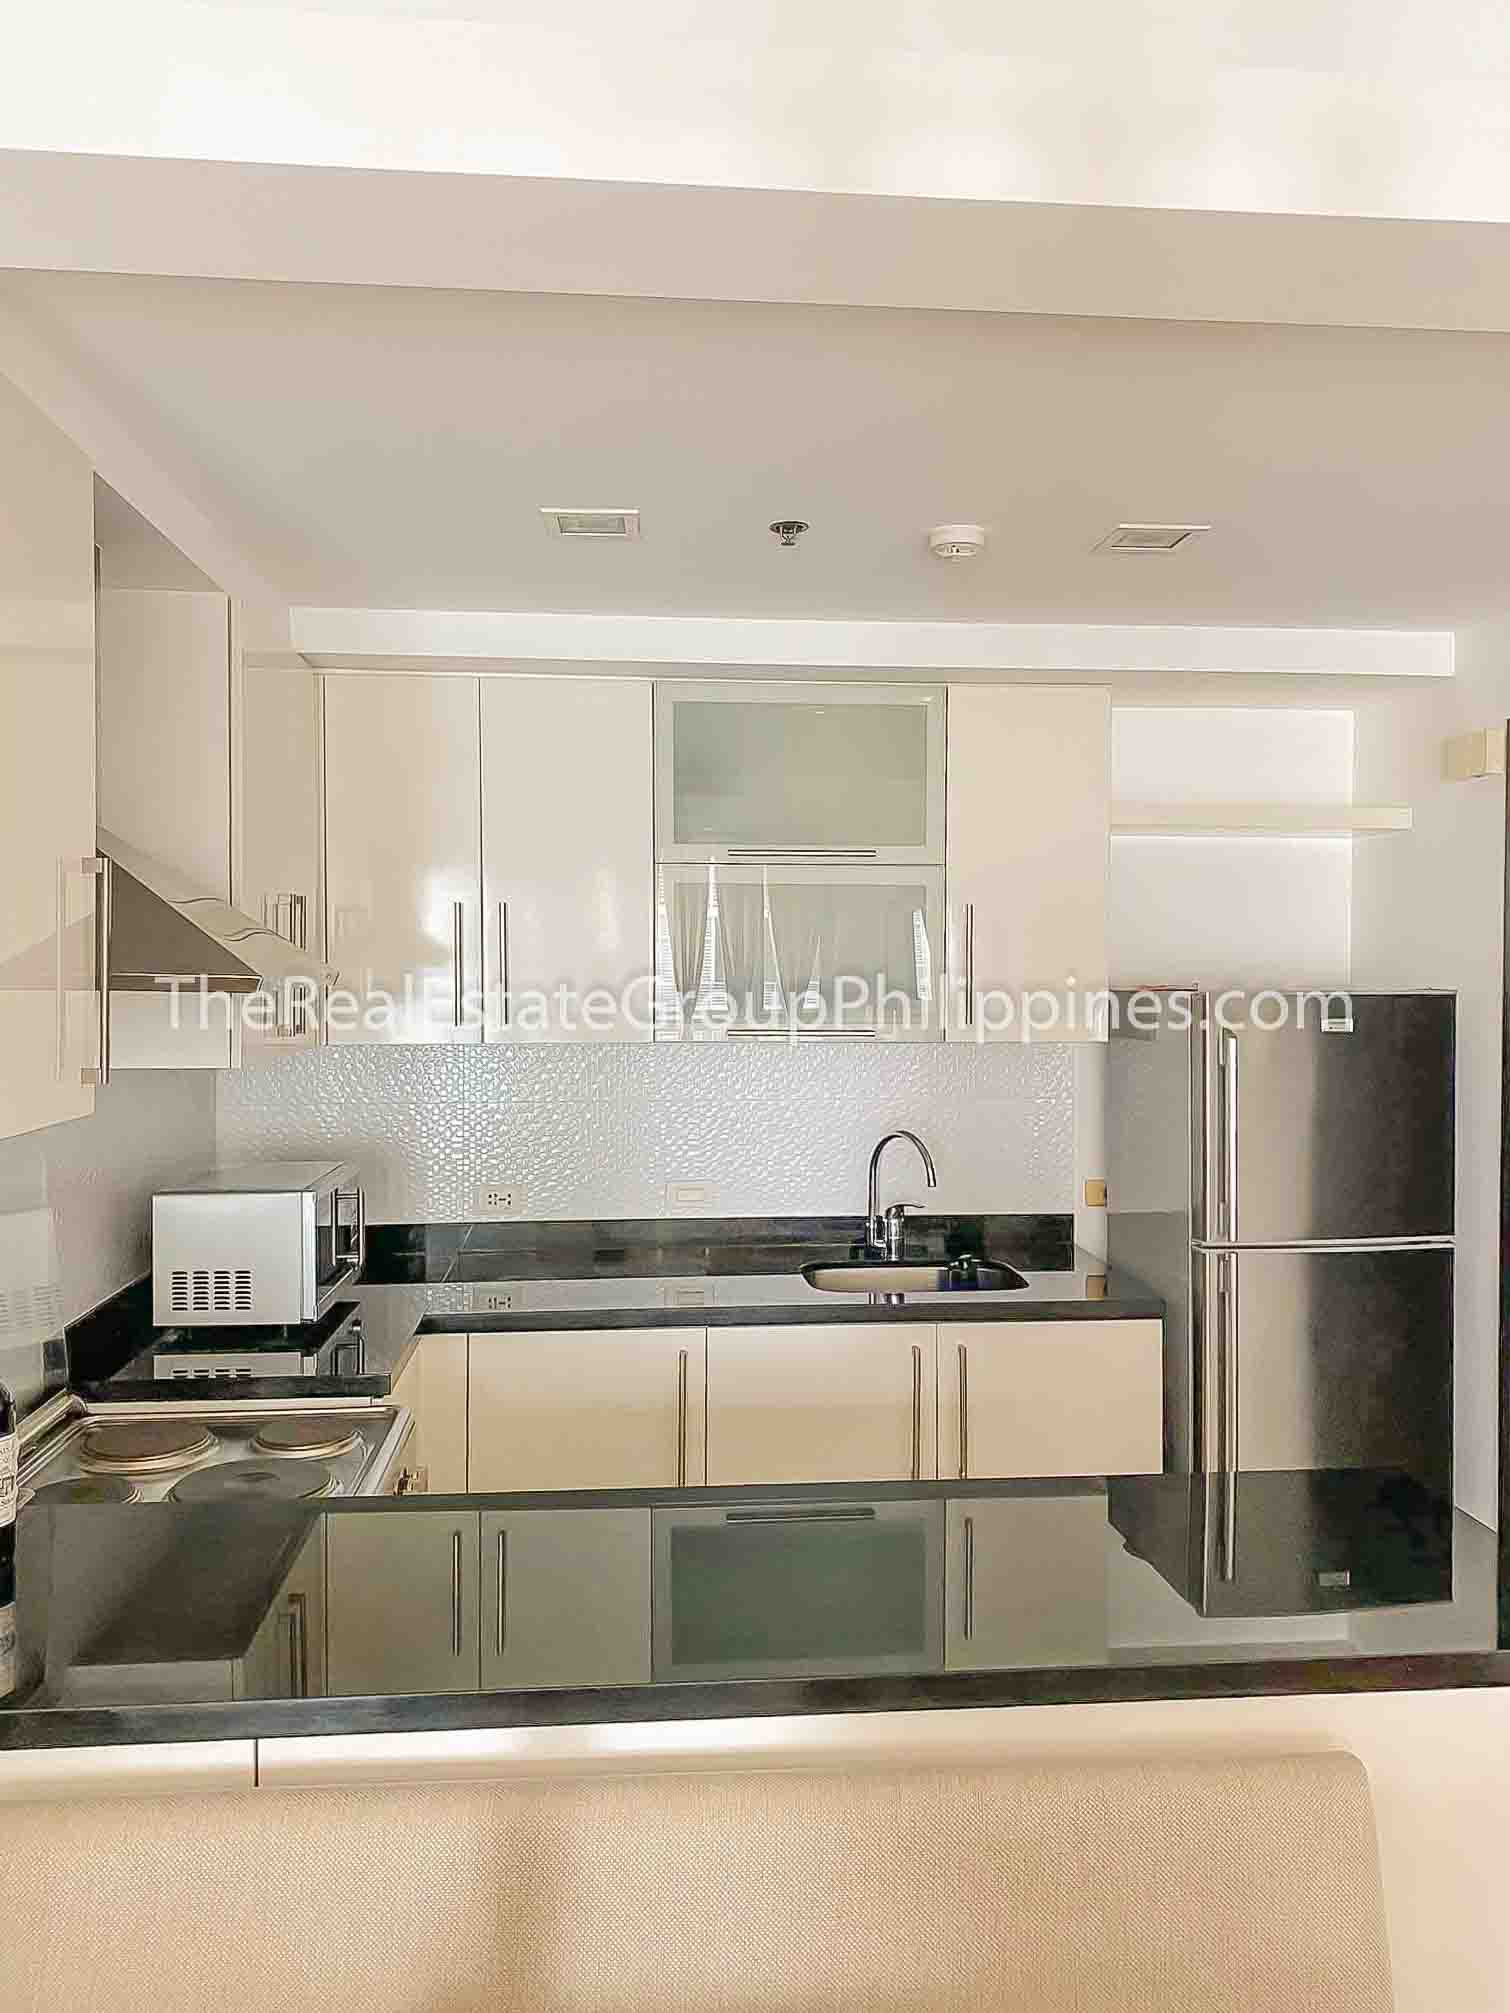 1BR Condo For Rent, East Tower, One Serendra, BGC 14E-5